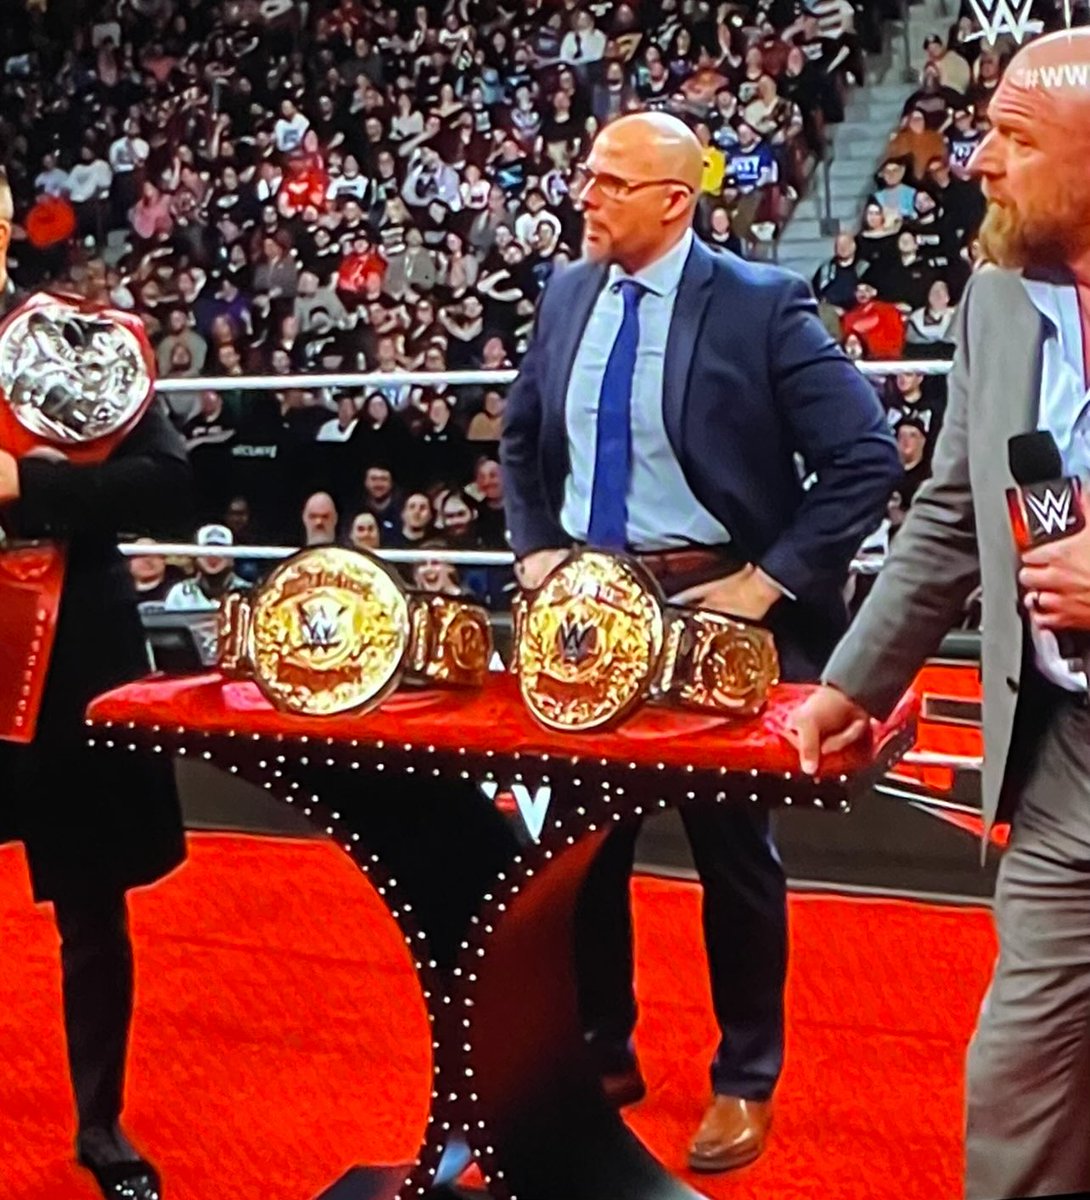 Those new tag titles are much better looking than the old ones. #WWERaw